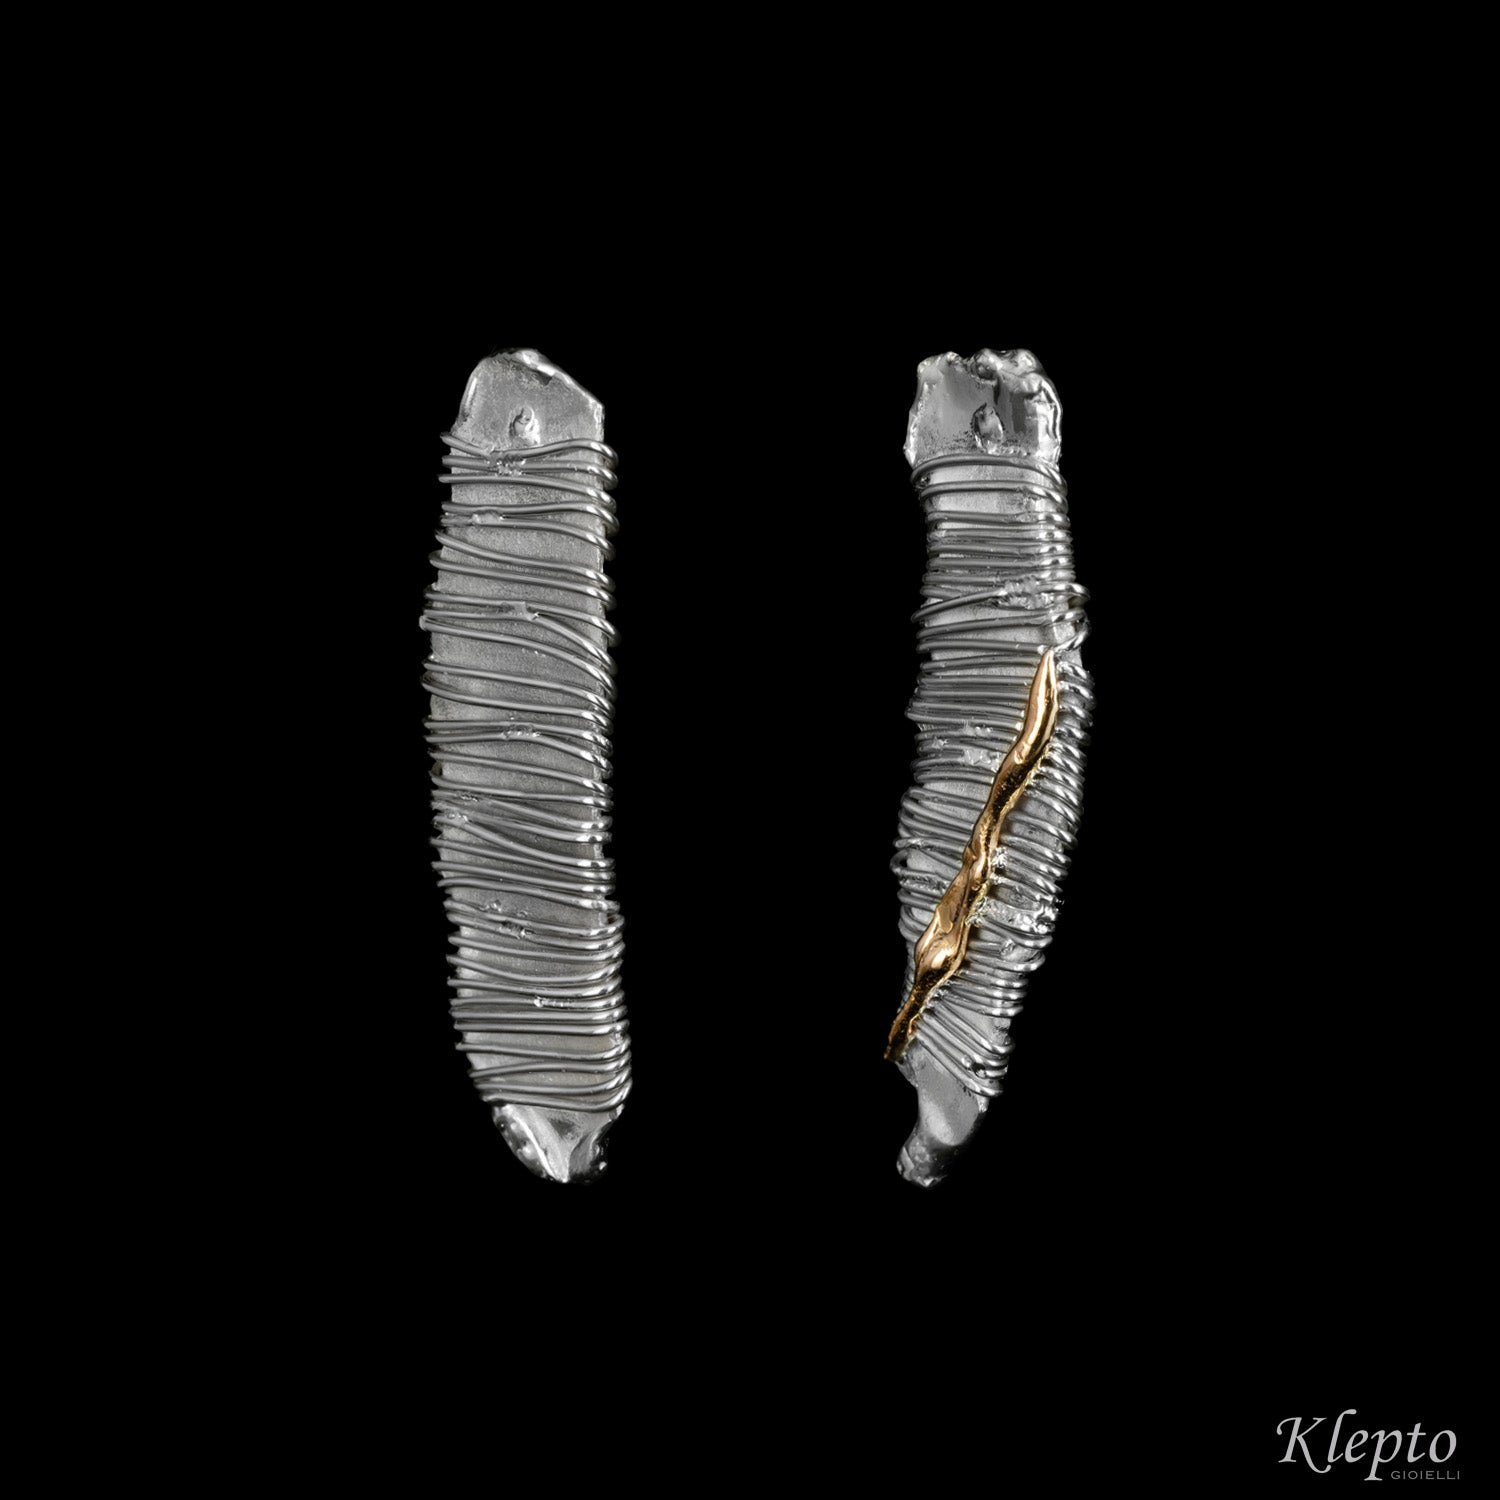 Silnova® "Cosmic" Silver earrings with rose gold details